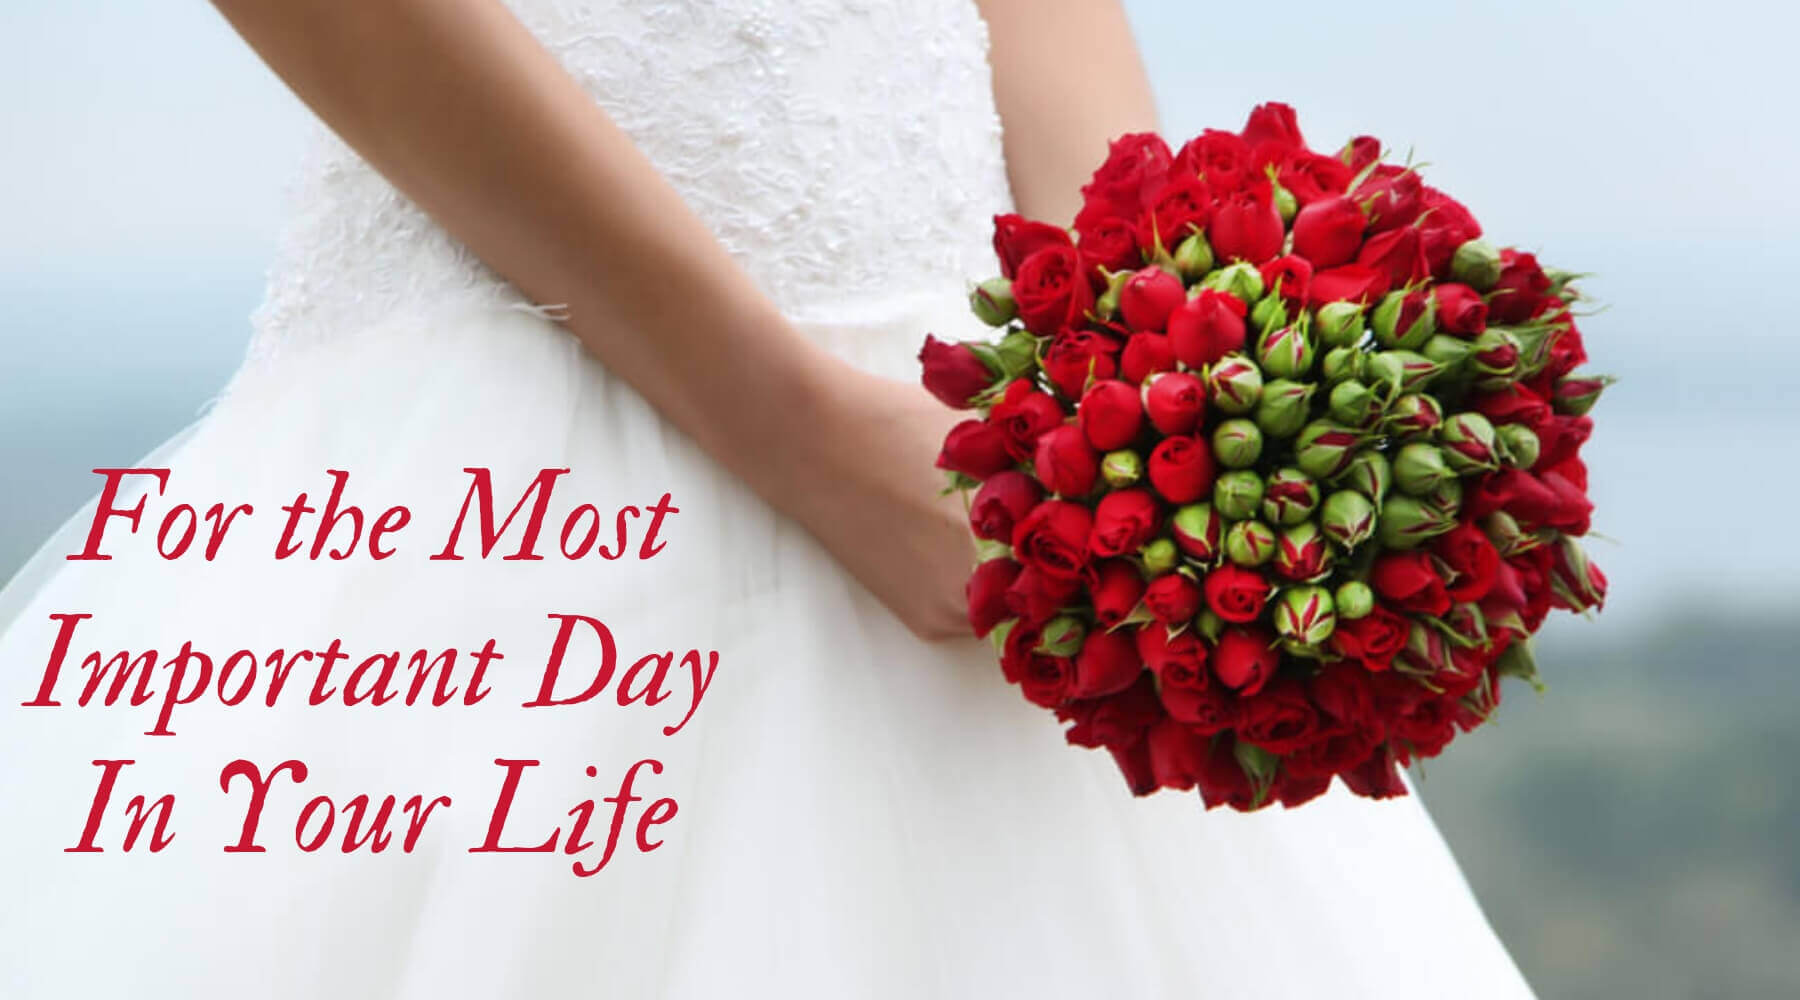 chose your best jewellery for the most important day of your life